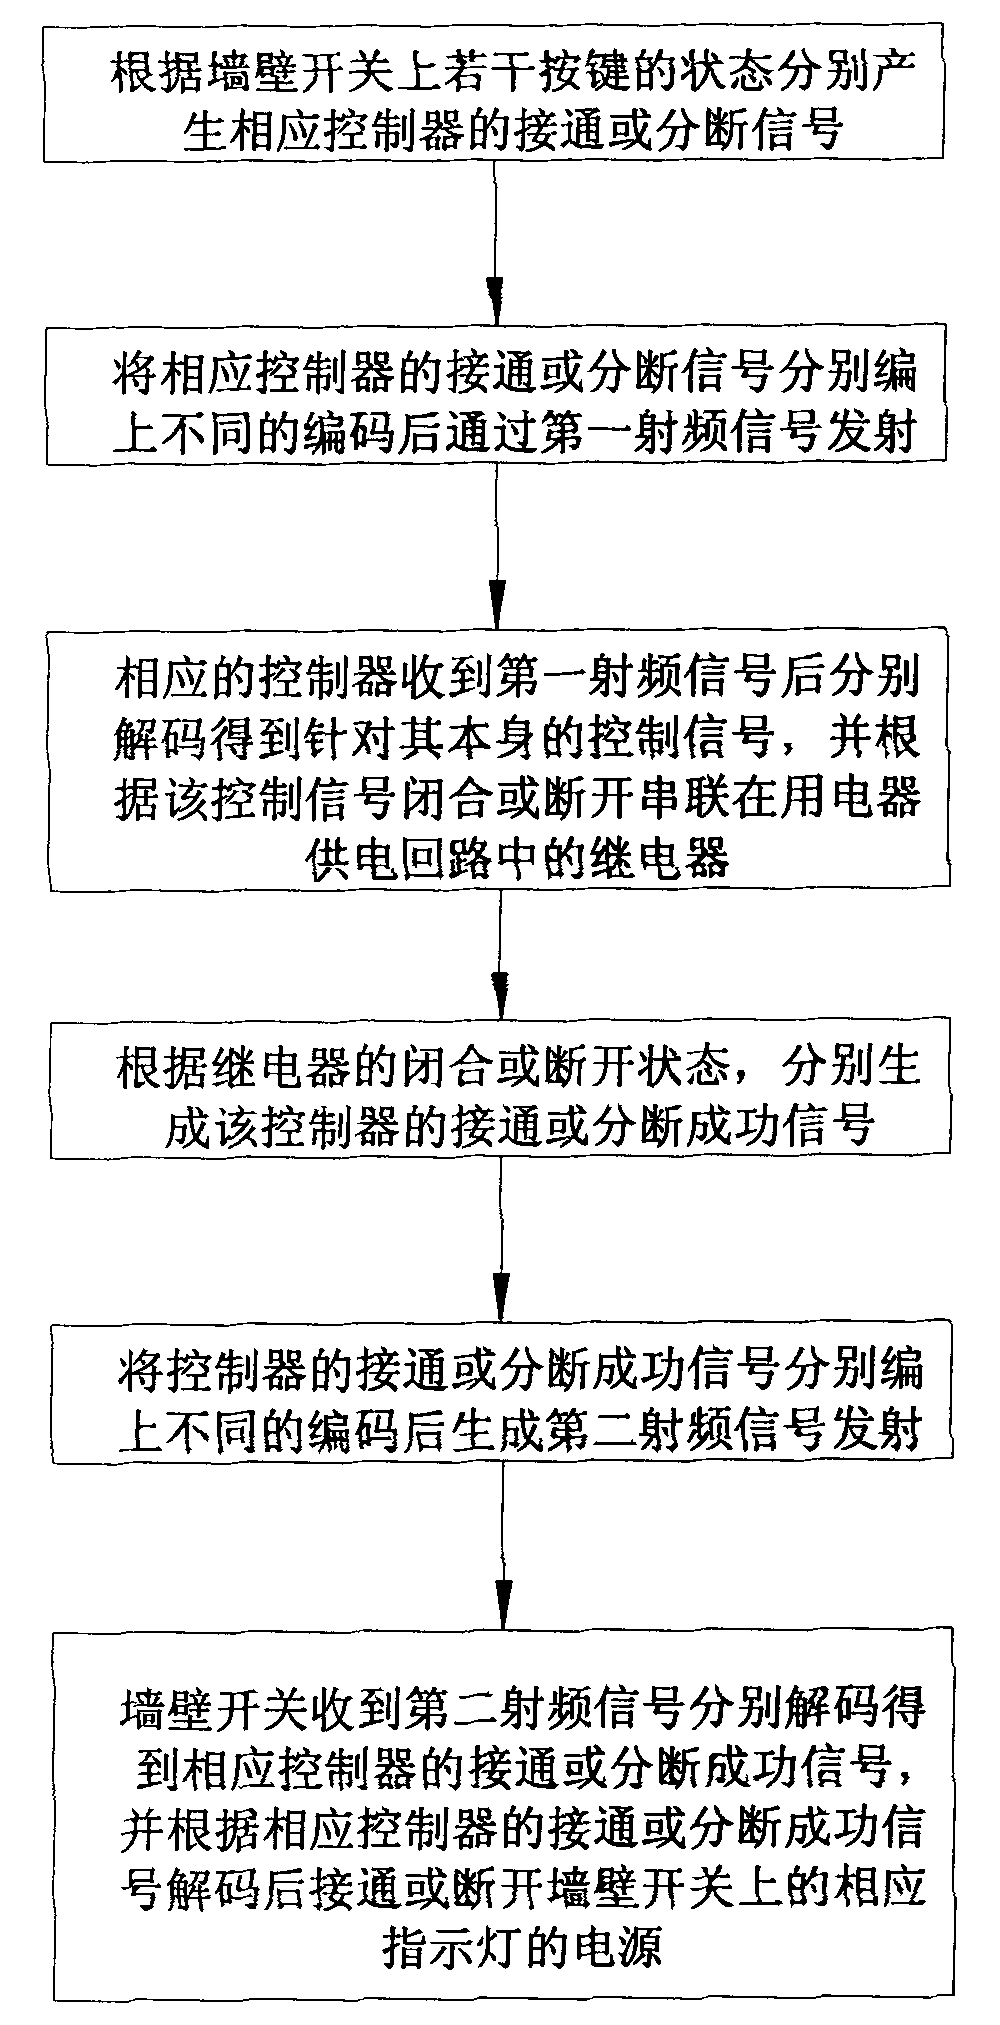 Remote control wall switch, control method and electrical appliance remote control switch system